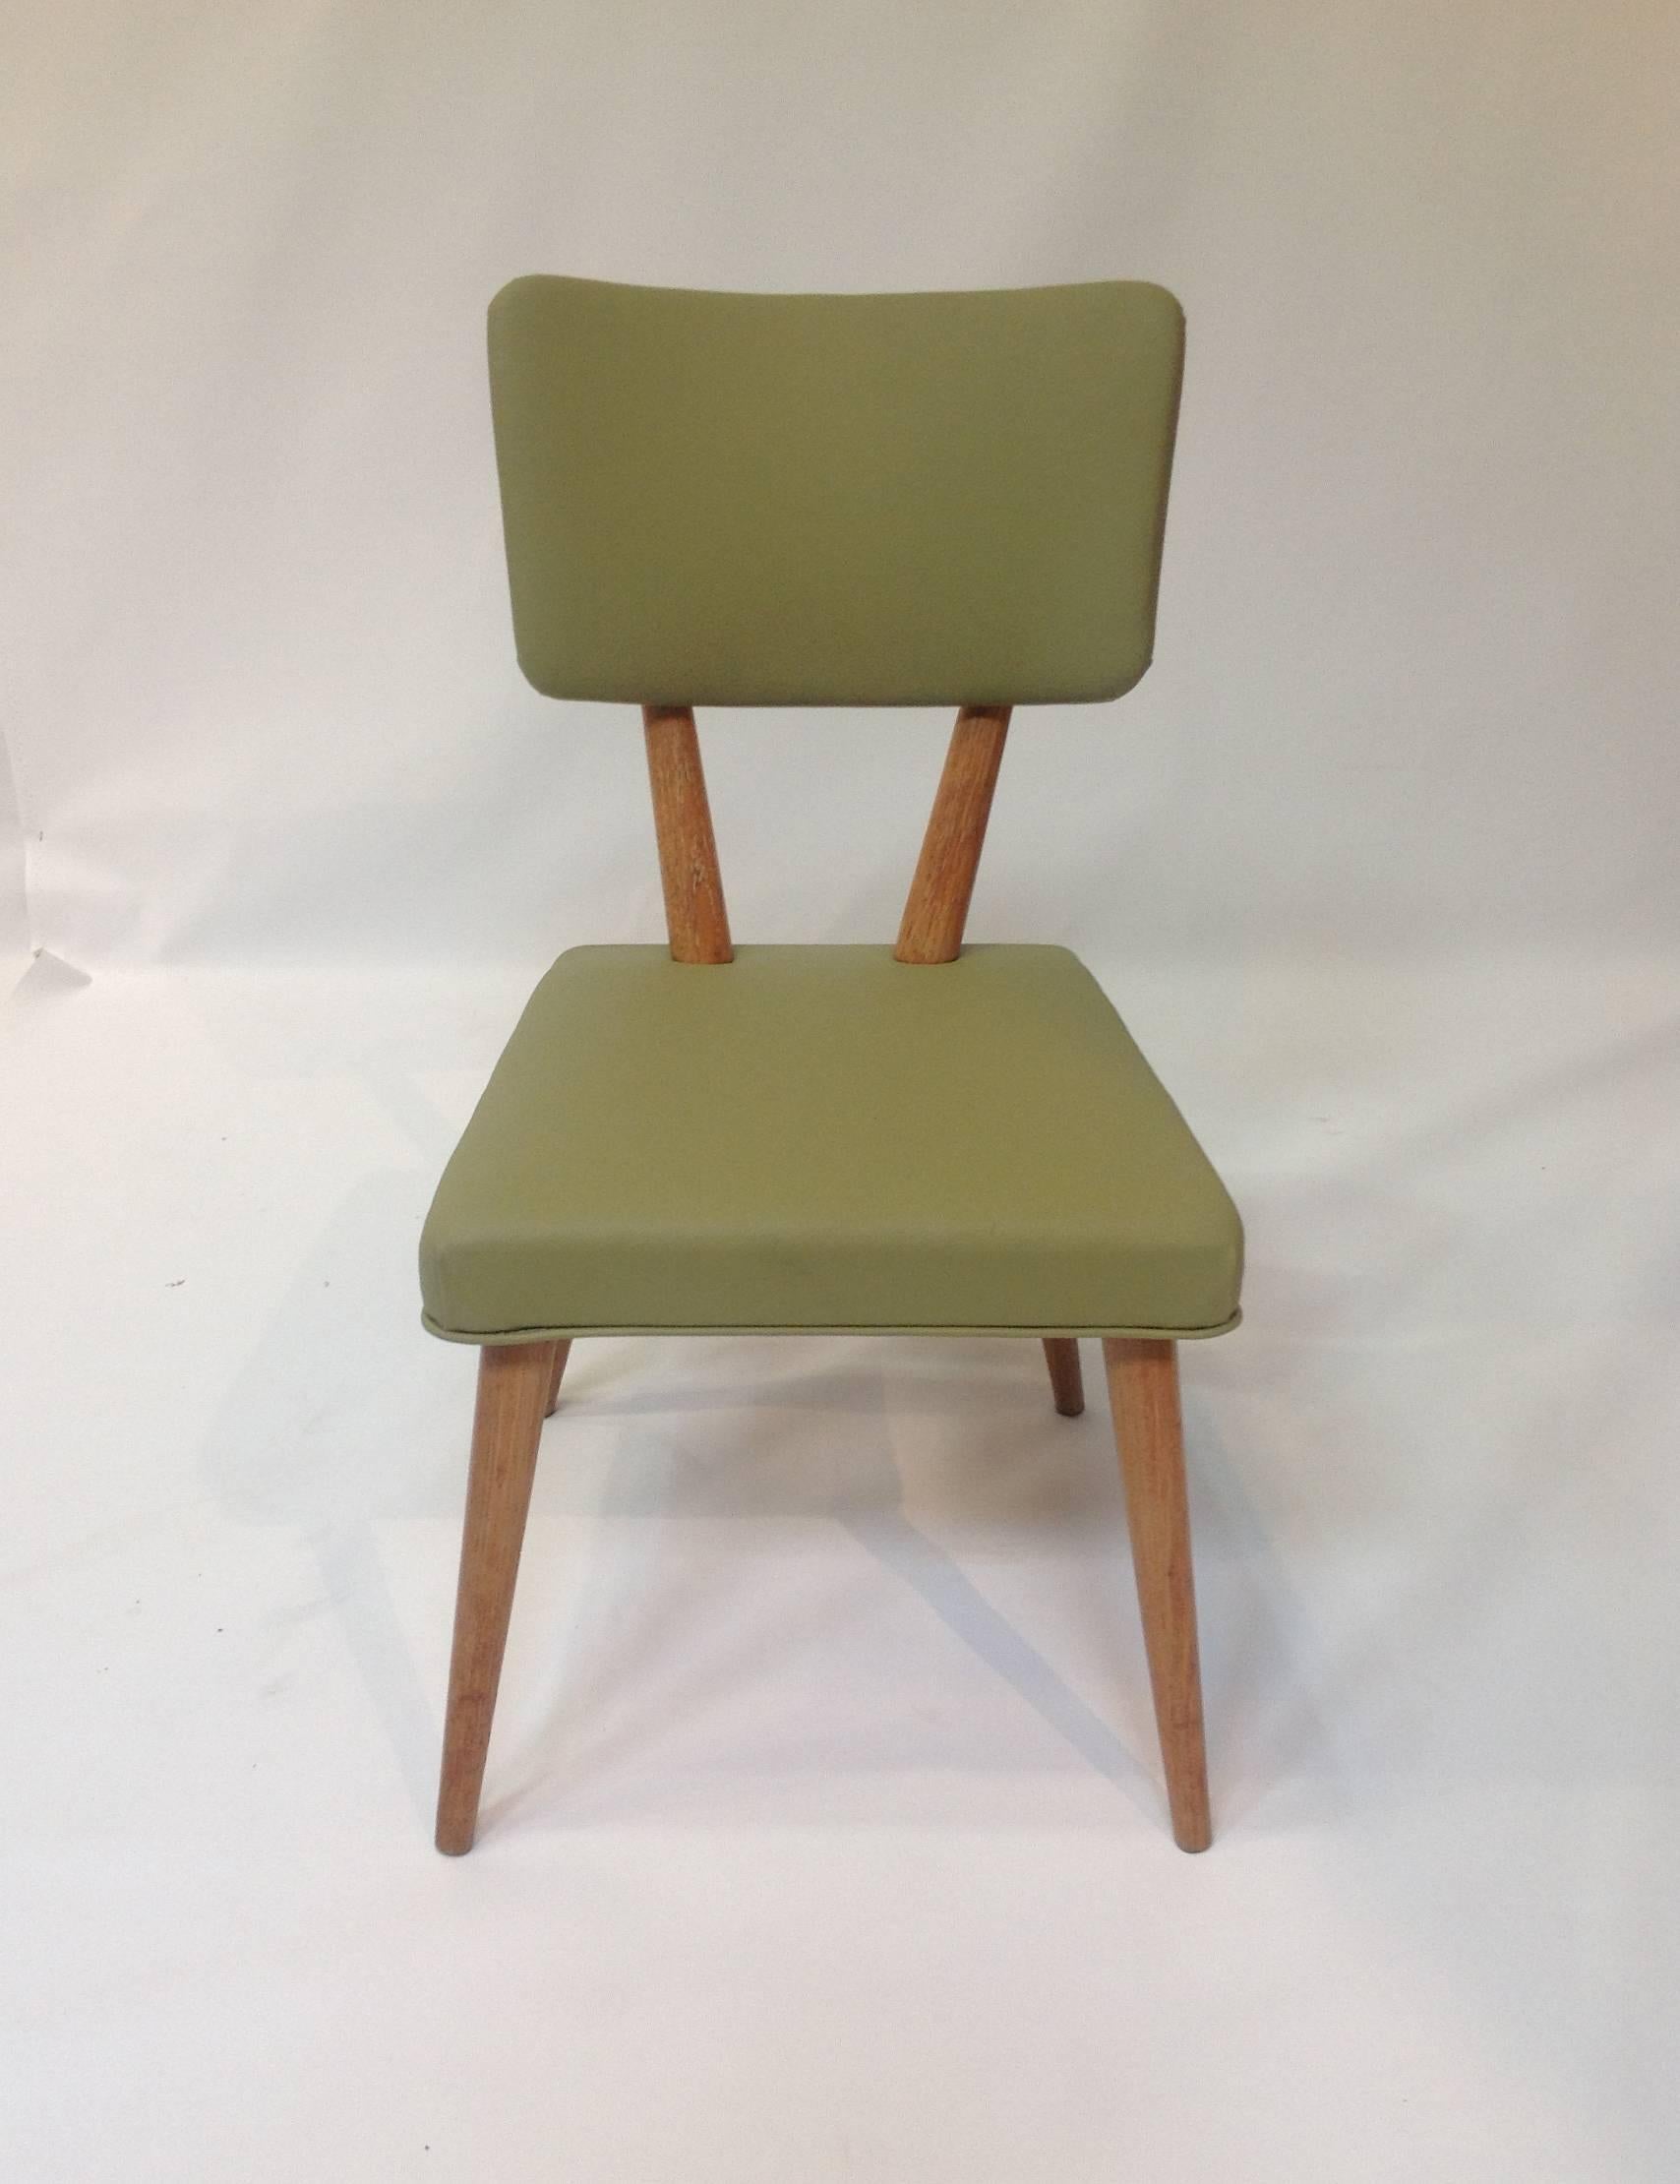 Newly re-upholstered in a beautiful green vinyl, these dining chairs have a classic, crisp, Mid-Century design. Manufactured by Meier & Pohlmann Furniture Co. in 1950.